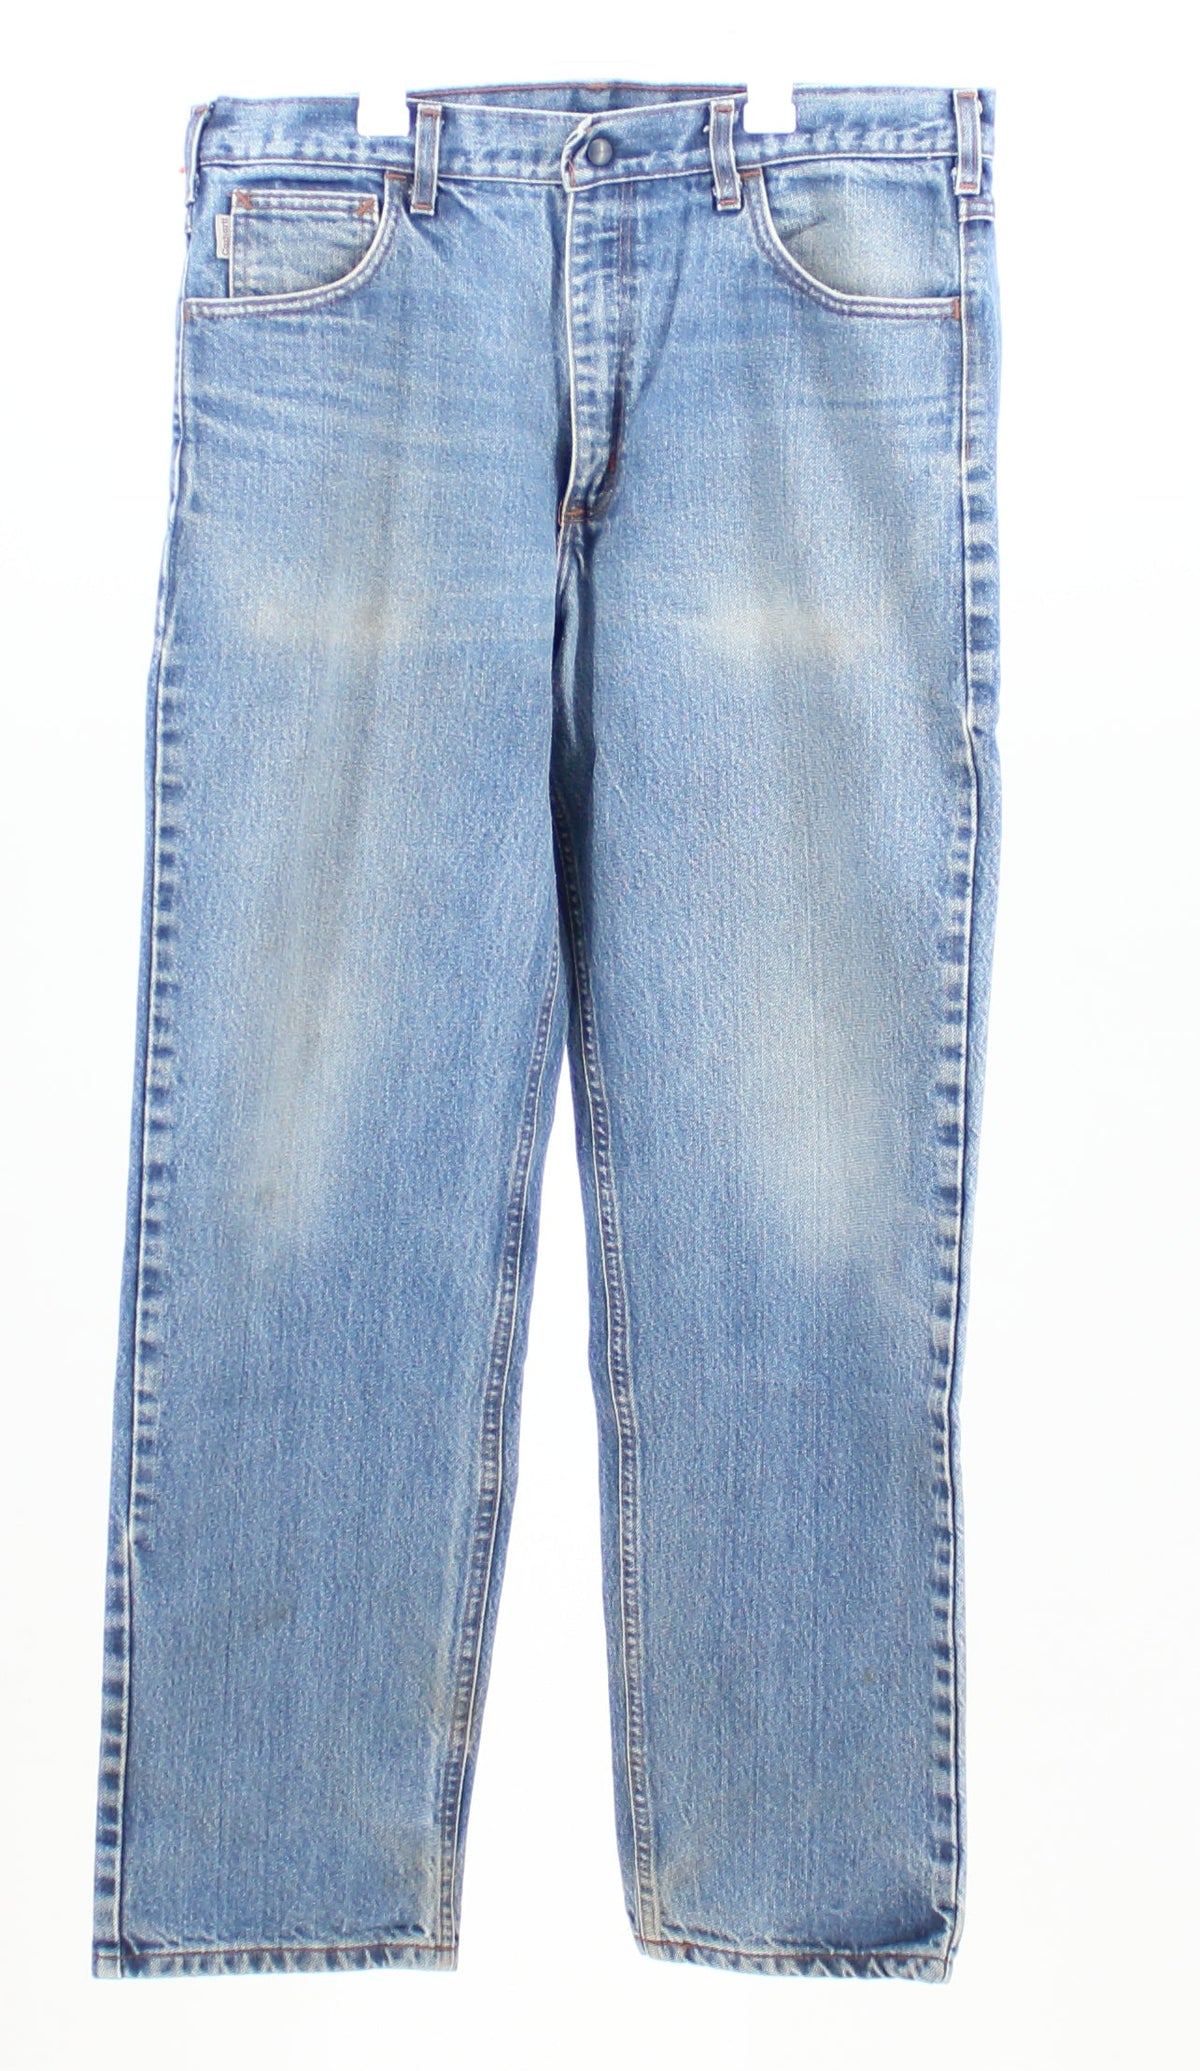 Carhartt Light Washed Denim Jeans with Snap Button Closure